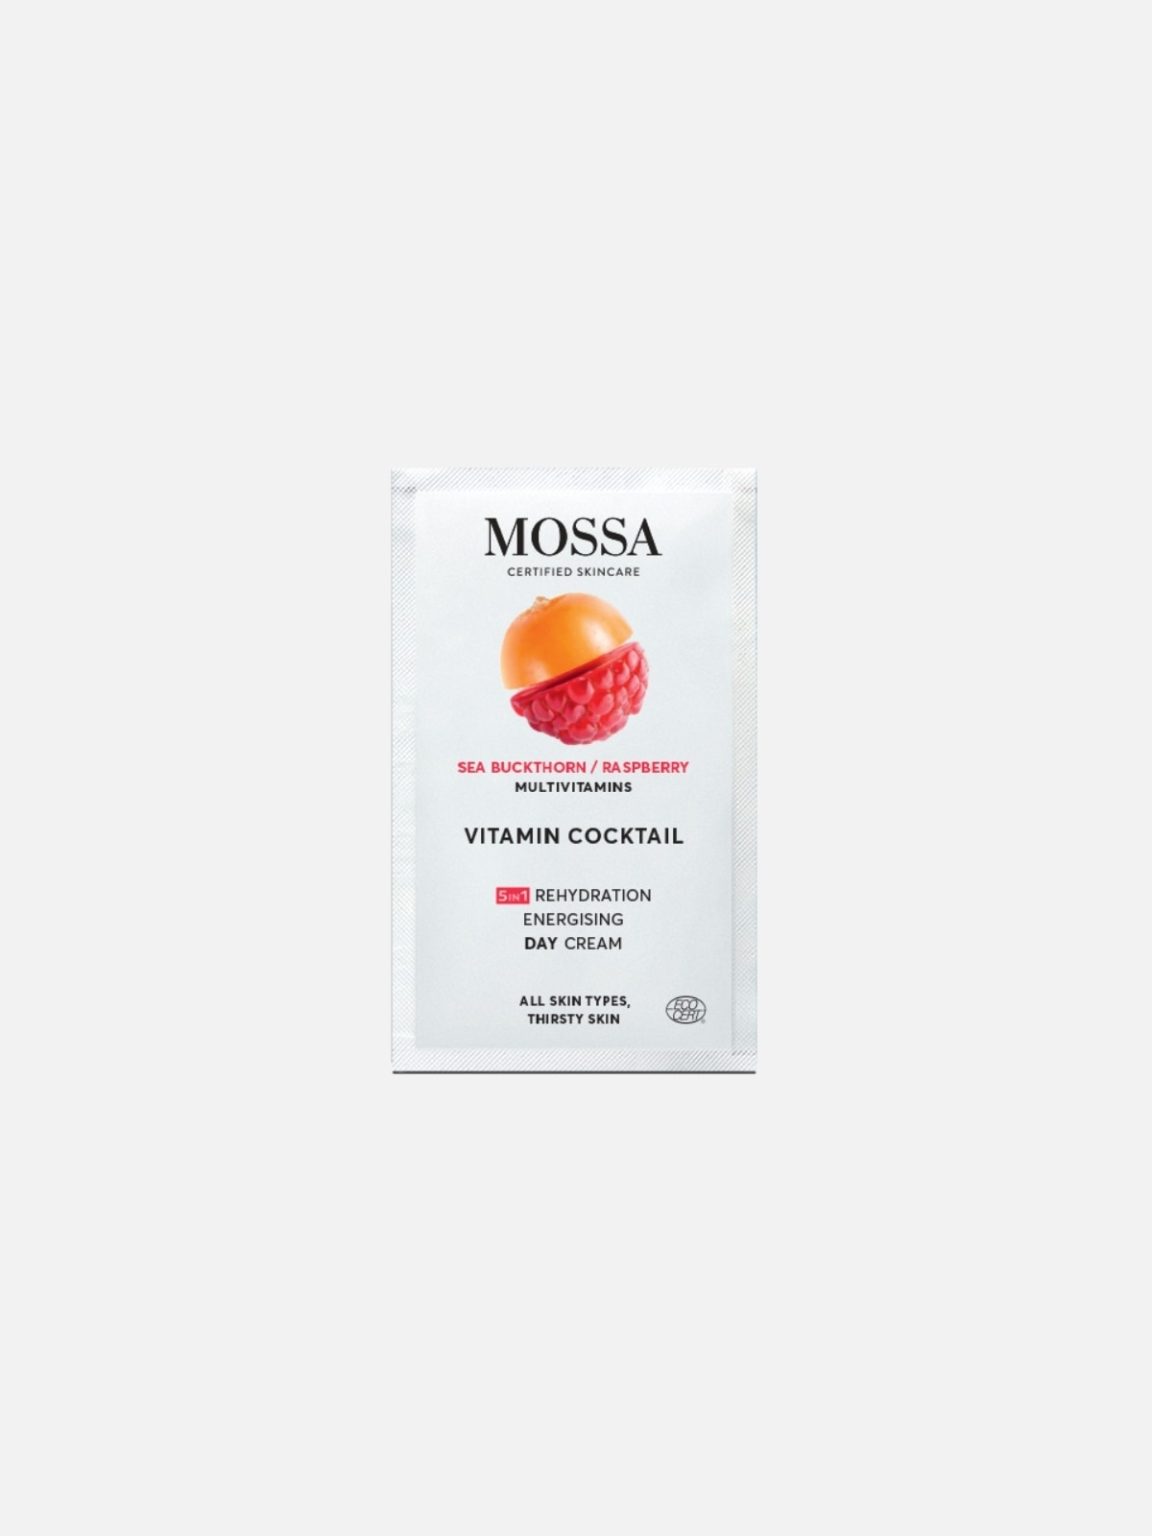 Mossa - Vitamin Cocktail 5in1 Rehydration Energising Day Cream